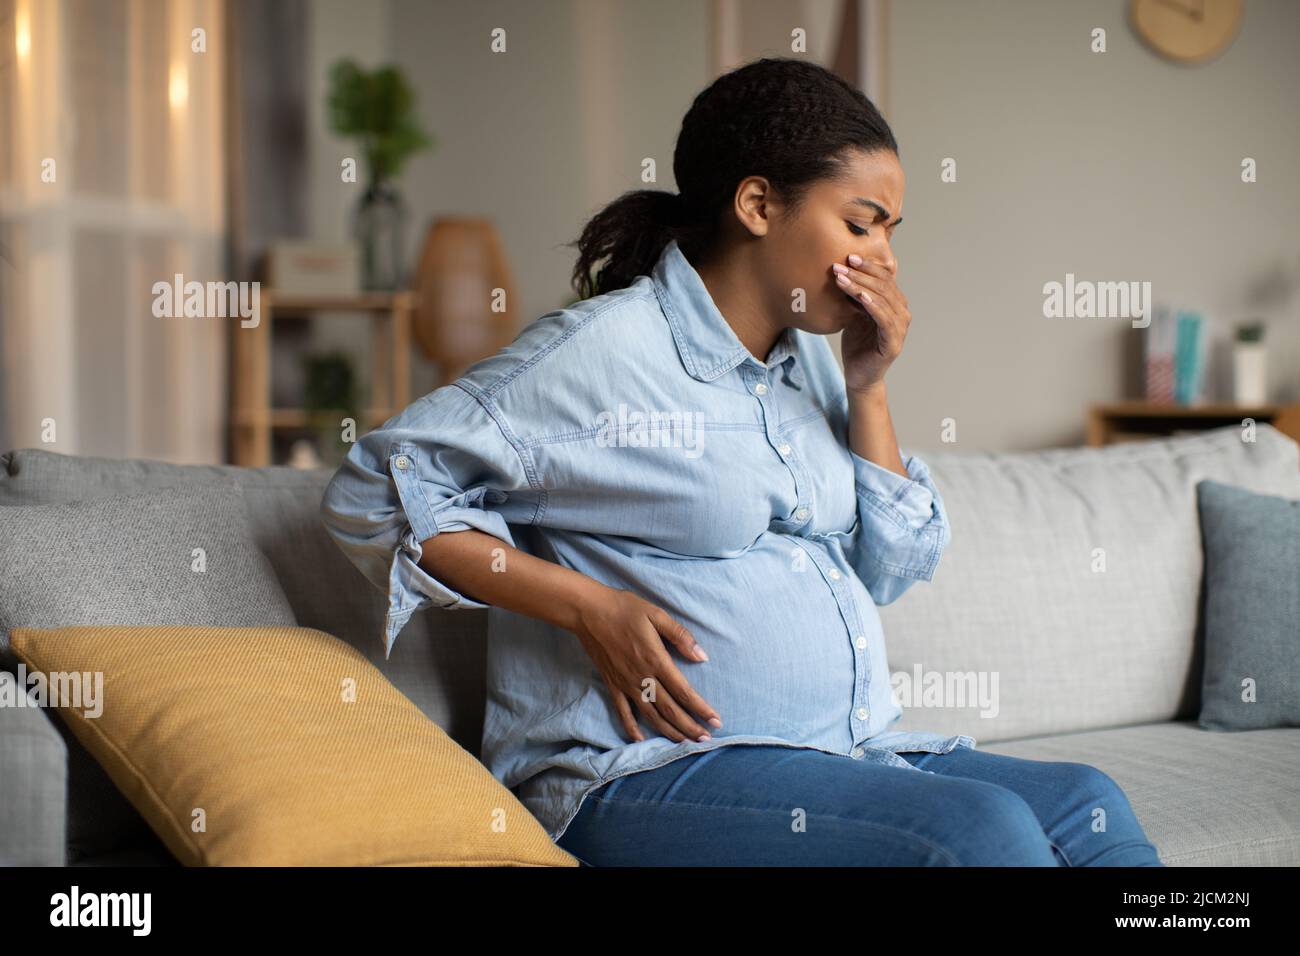 Pregnant Black Lady Suffering From Nausea Having Morning Sickness Indoor Stock Photo